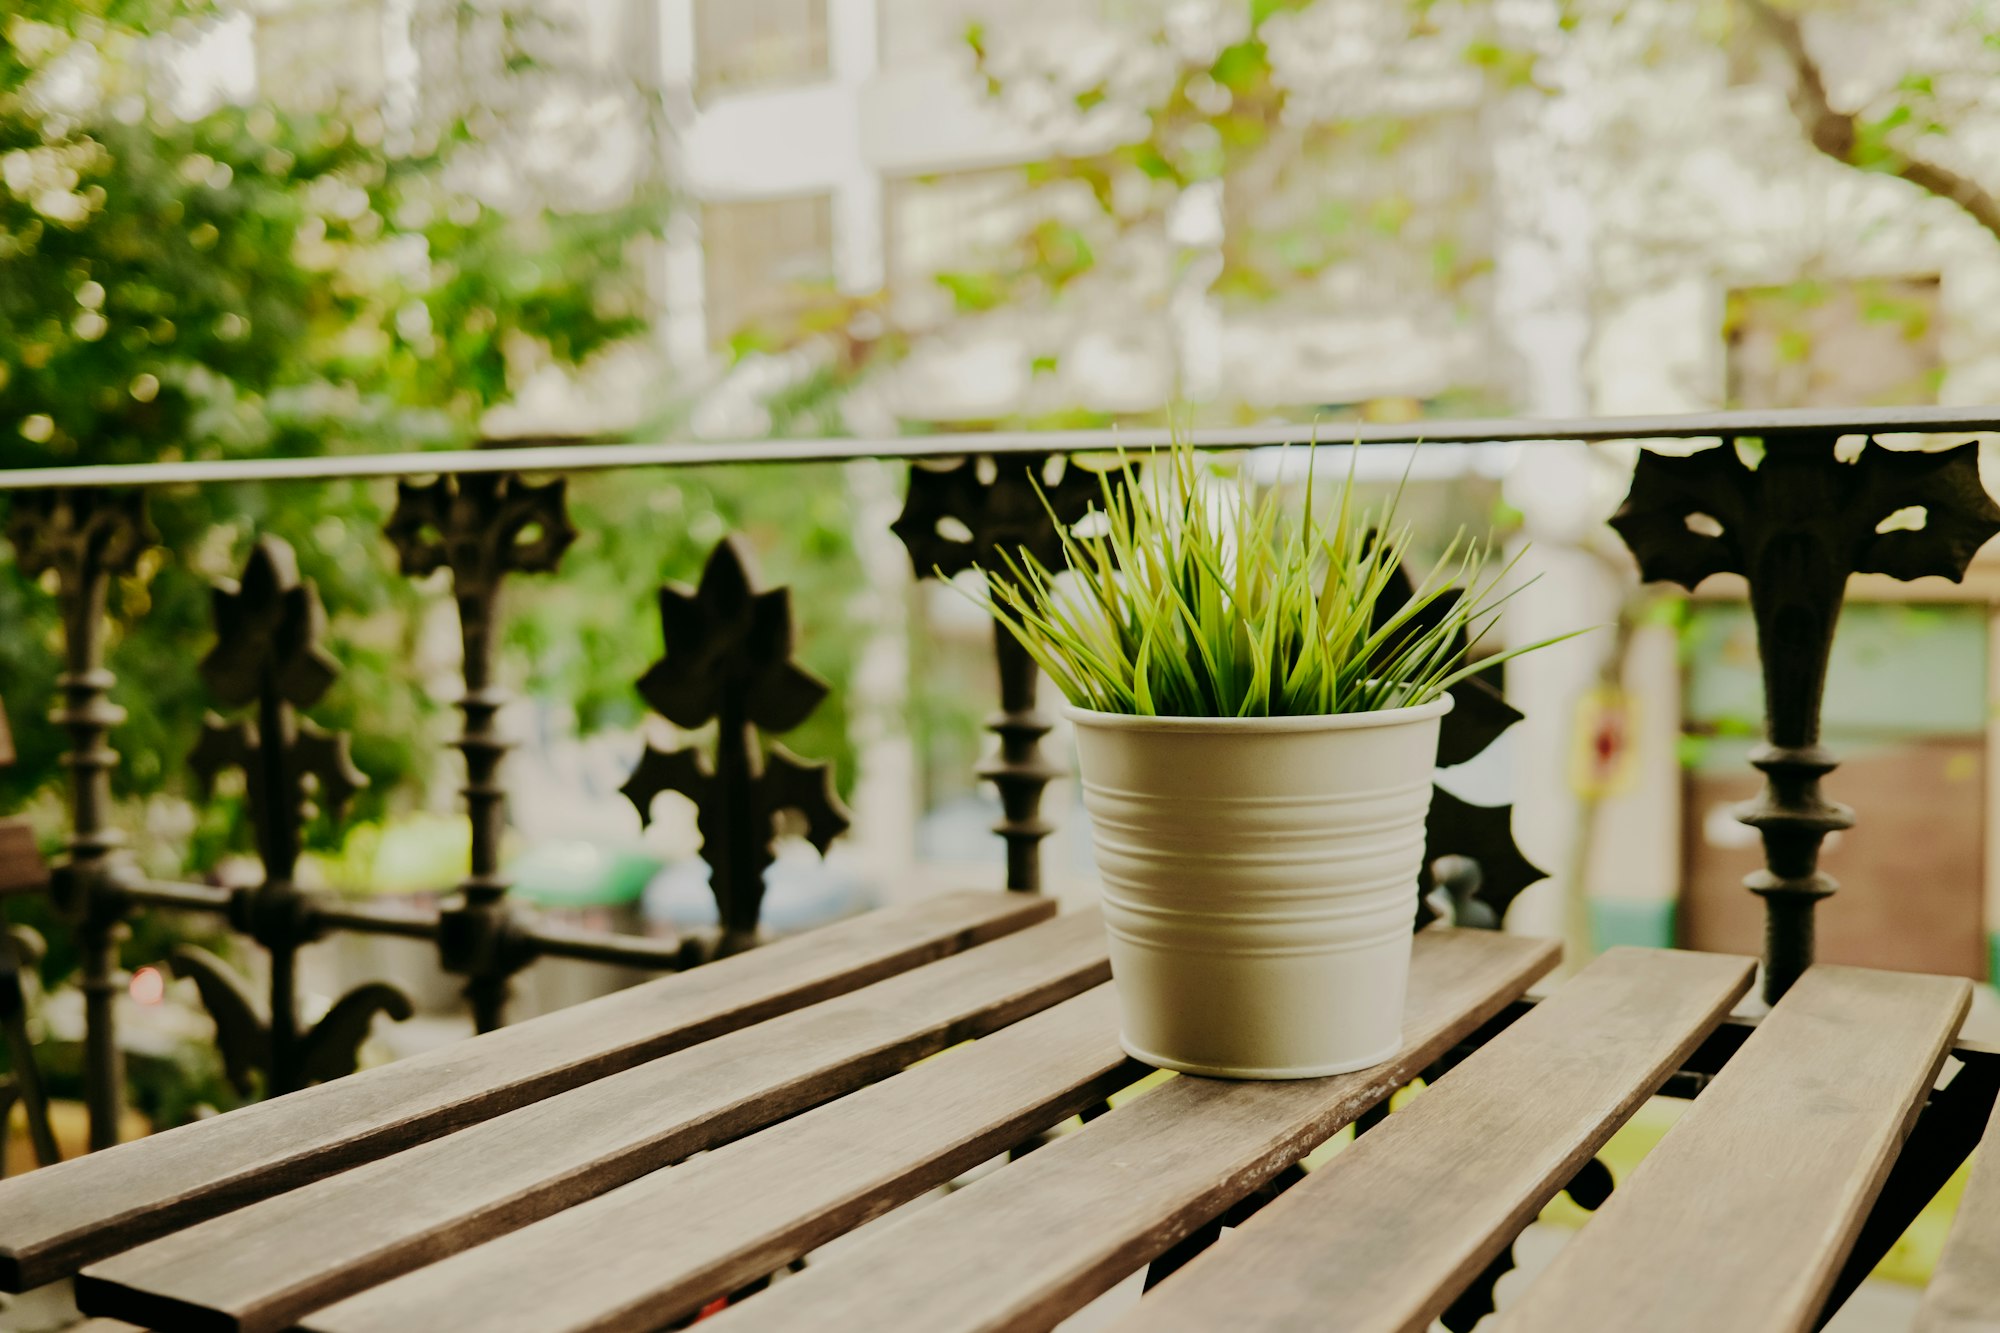 Decorative grass in flower pot stands on wooden table on balcony. Artificial green plant in galvaniz